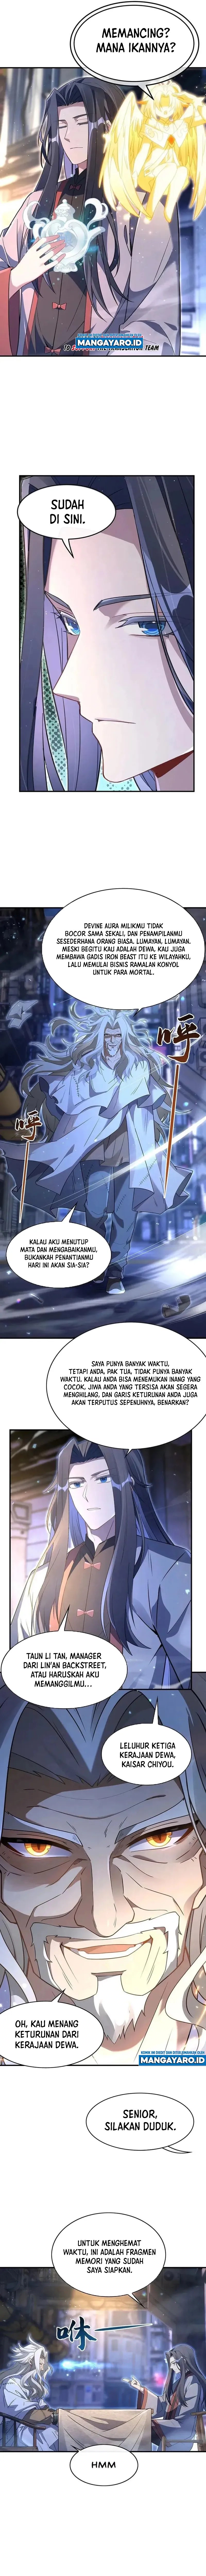 Dilarang COPAS - situs resmi www.mangacanblog.com - Komik my female apprentices are all big shots from the future 269 - chapter 269 270 Indonesia my female apprentices are all big shots from the future 269 - chapter 269 Terbaru 5|Baca Manga Komik Indonesia|Mangacan